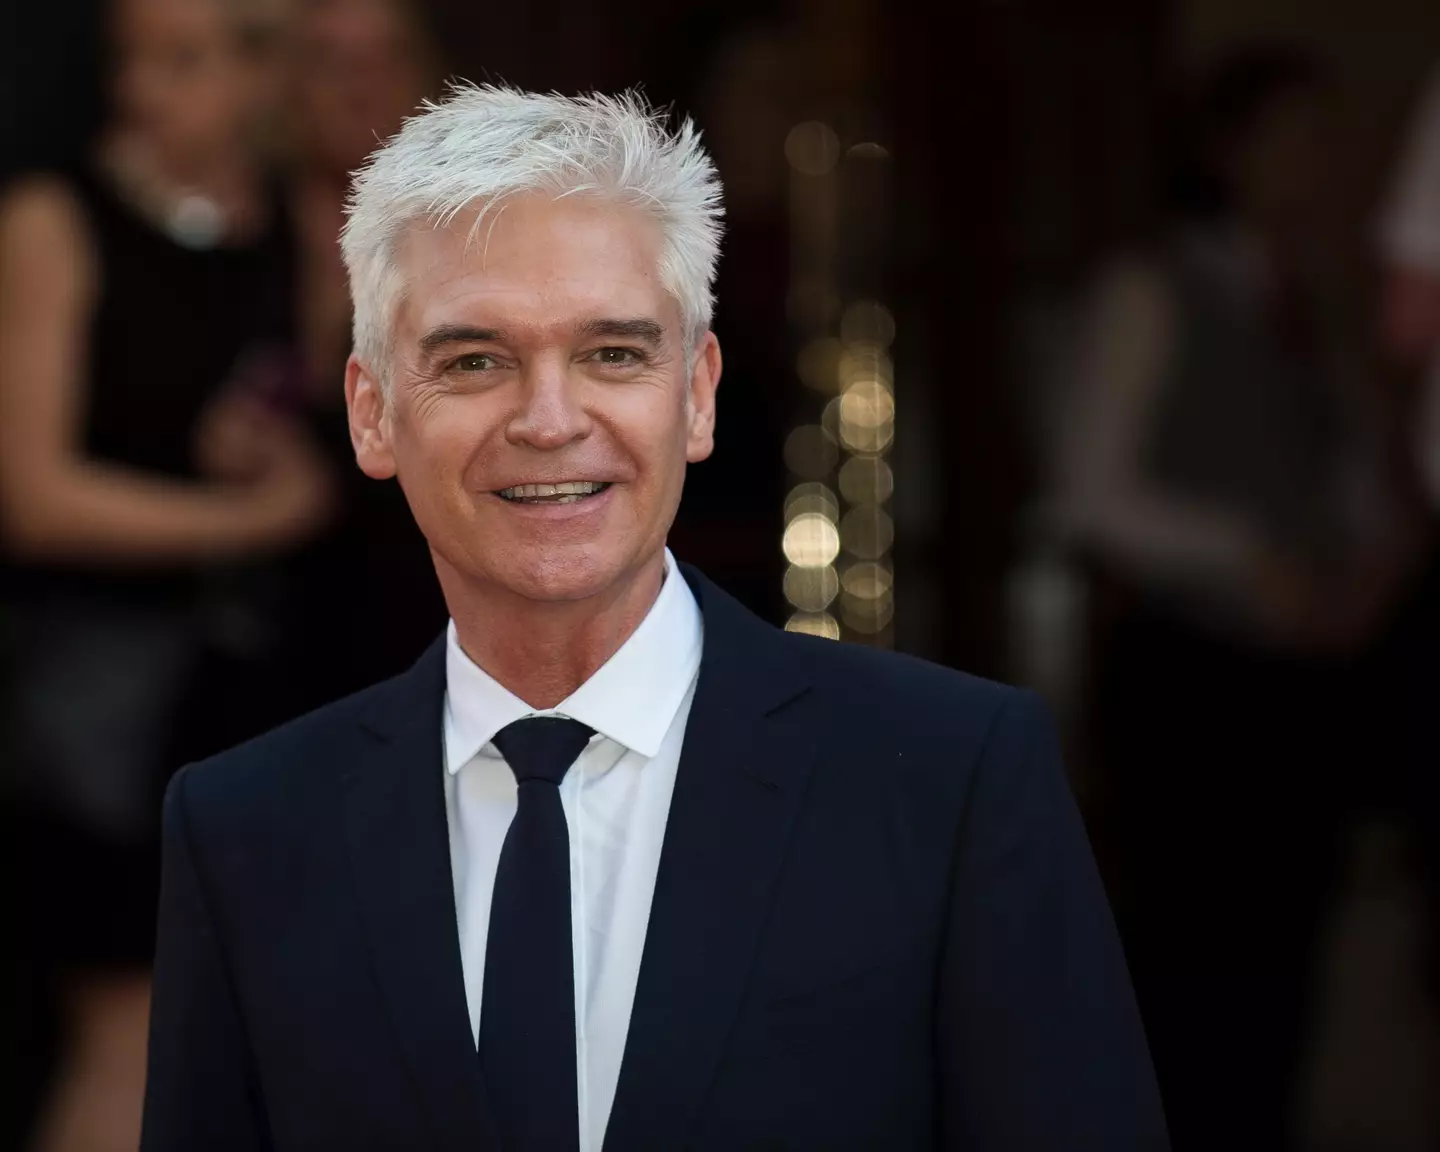 Phillip Schofield has said he 'no longer has a brother'.